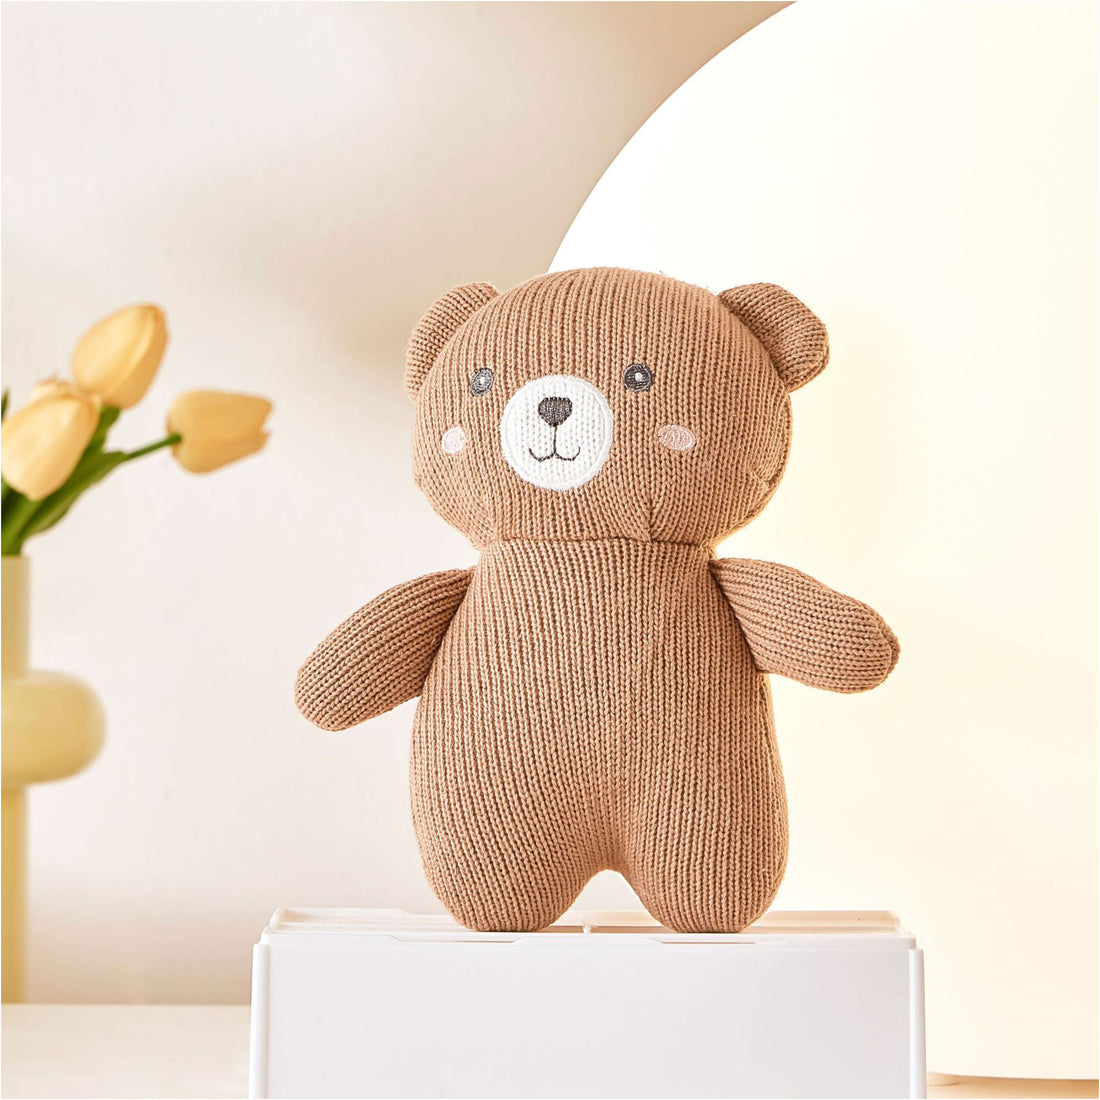 A close-up photo of a brown knitted teddy bear sitting on a white box. The teddy bear has black button eyes, a stitched smile, and a black embroidered nose. It has a small pink patch sewn on its chest.